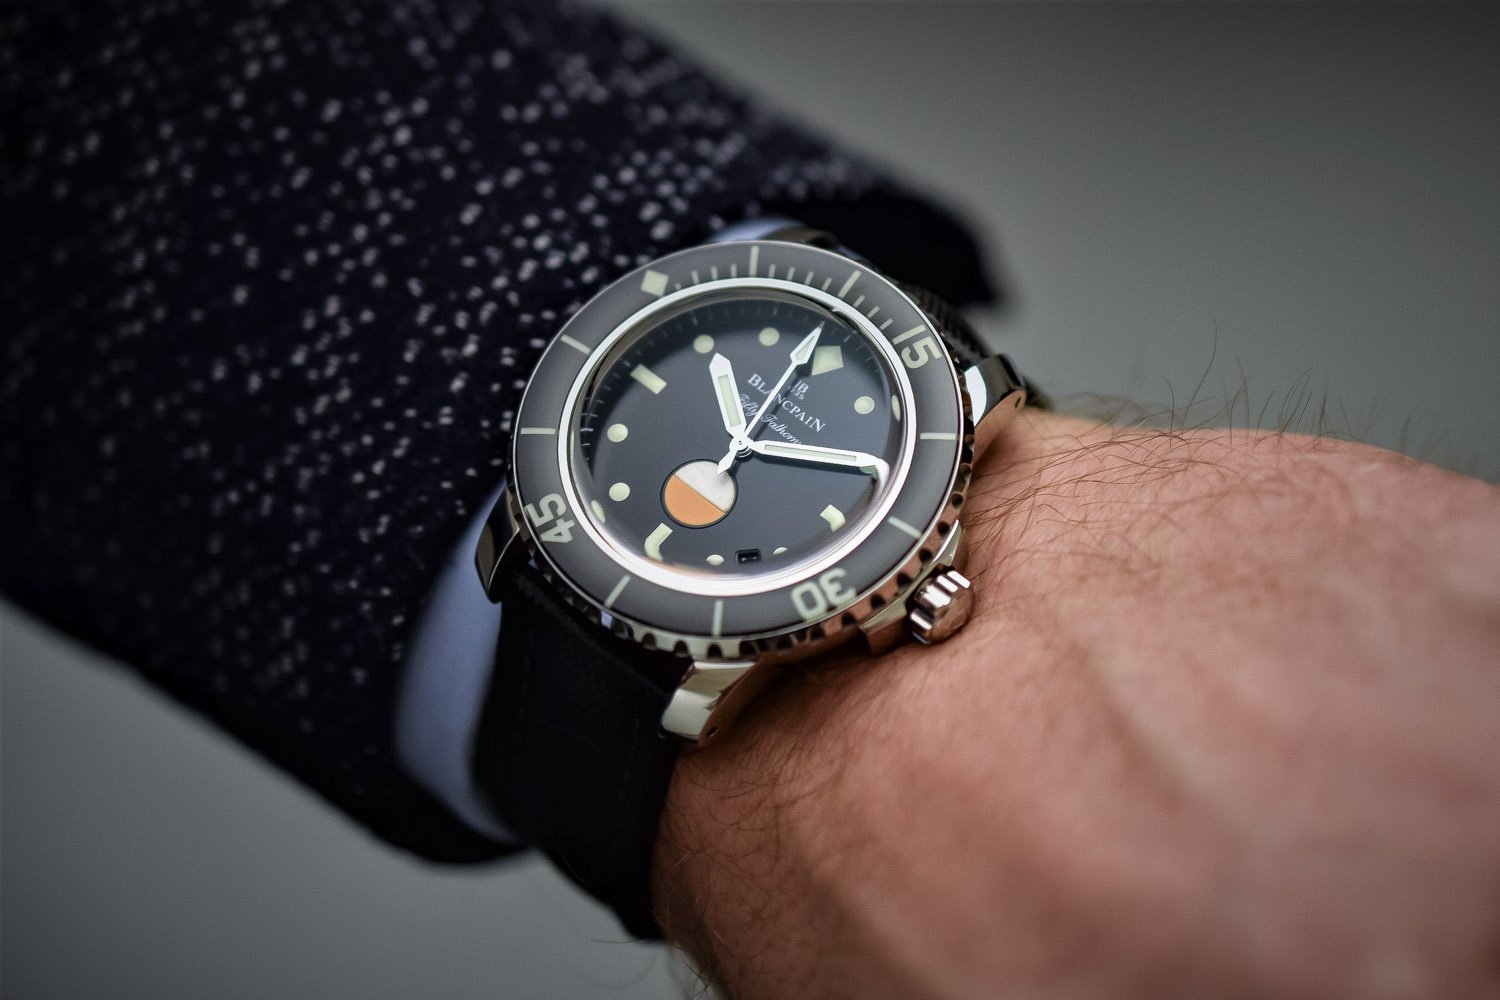 Blancpain Tribute To Fifty Fathoms MIL-SPEC - Baselworld 2017